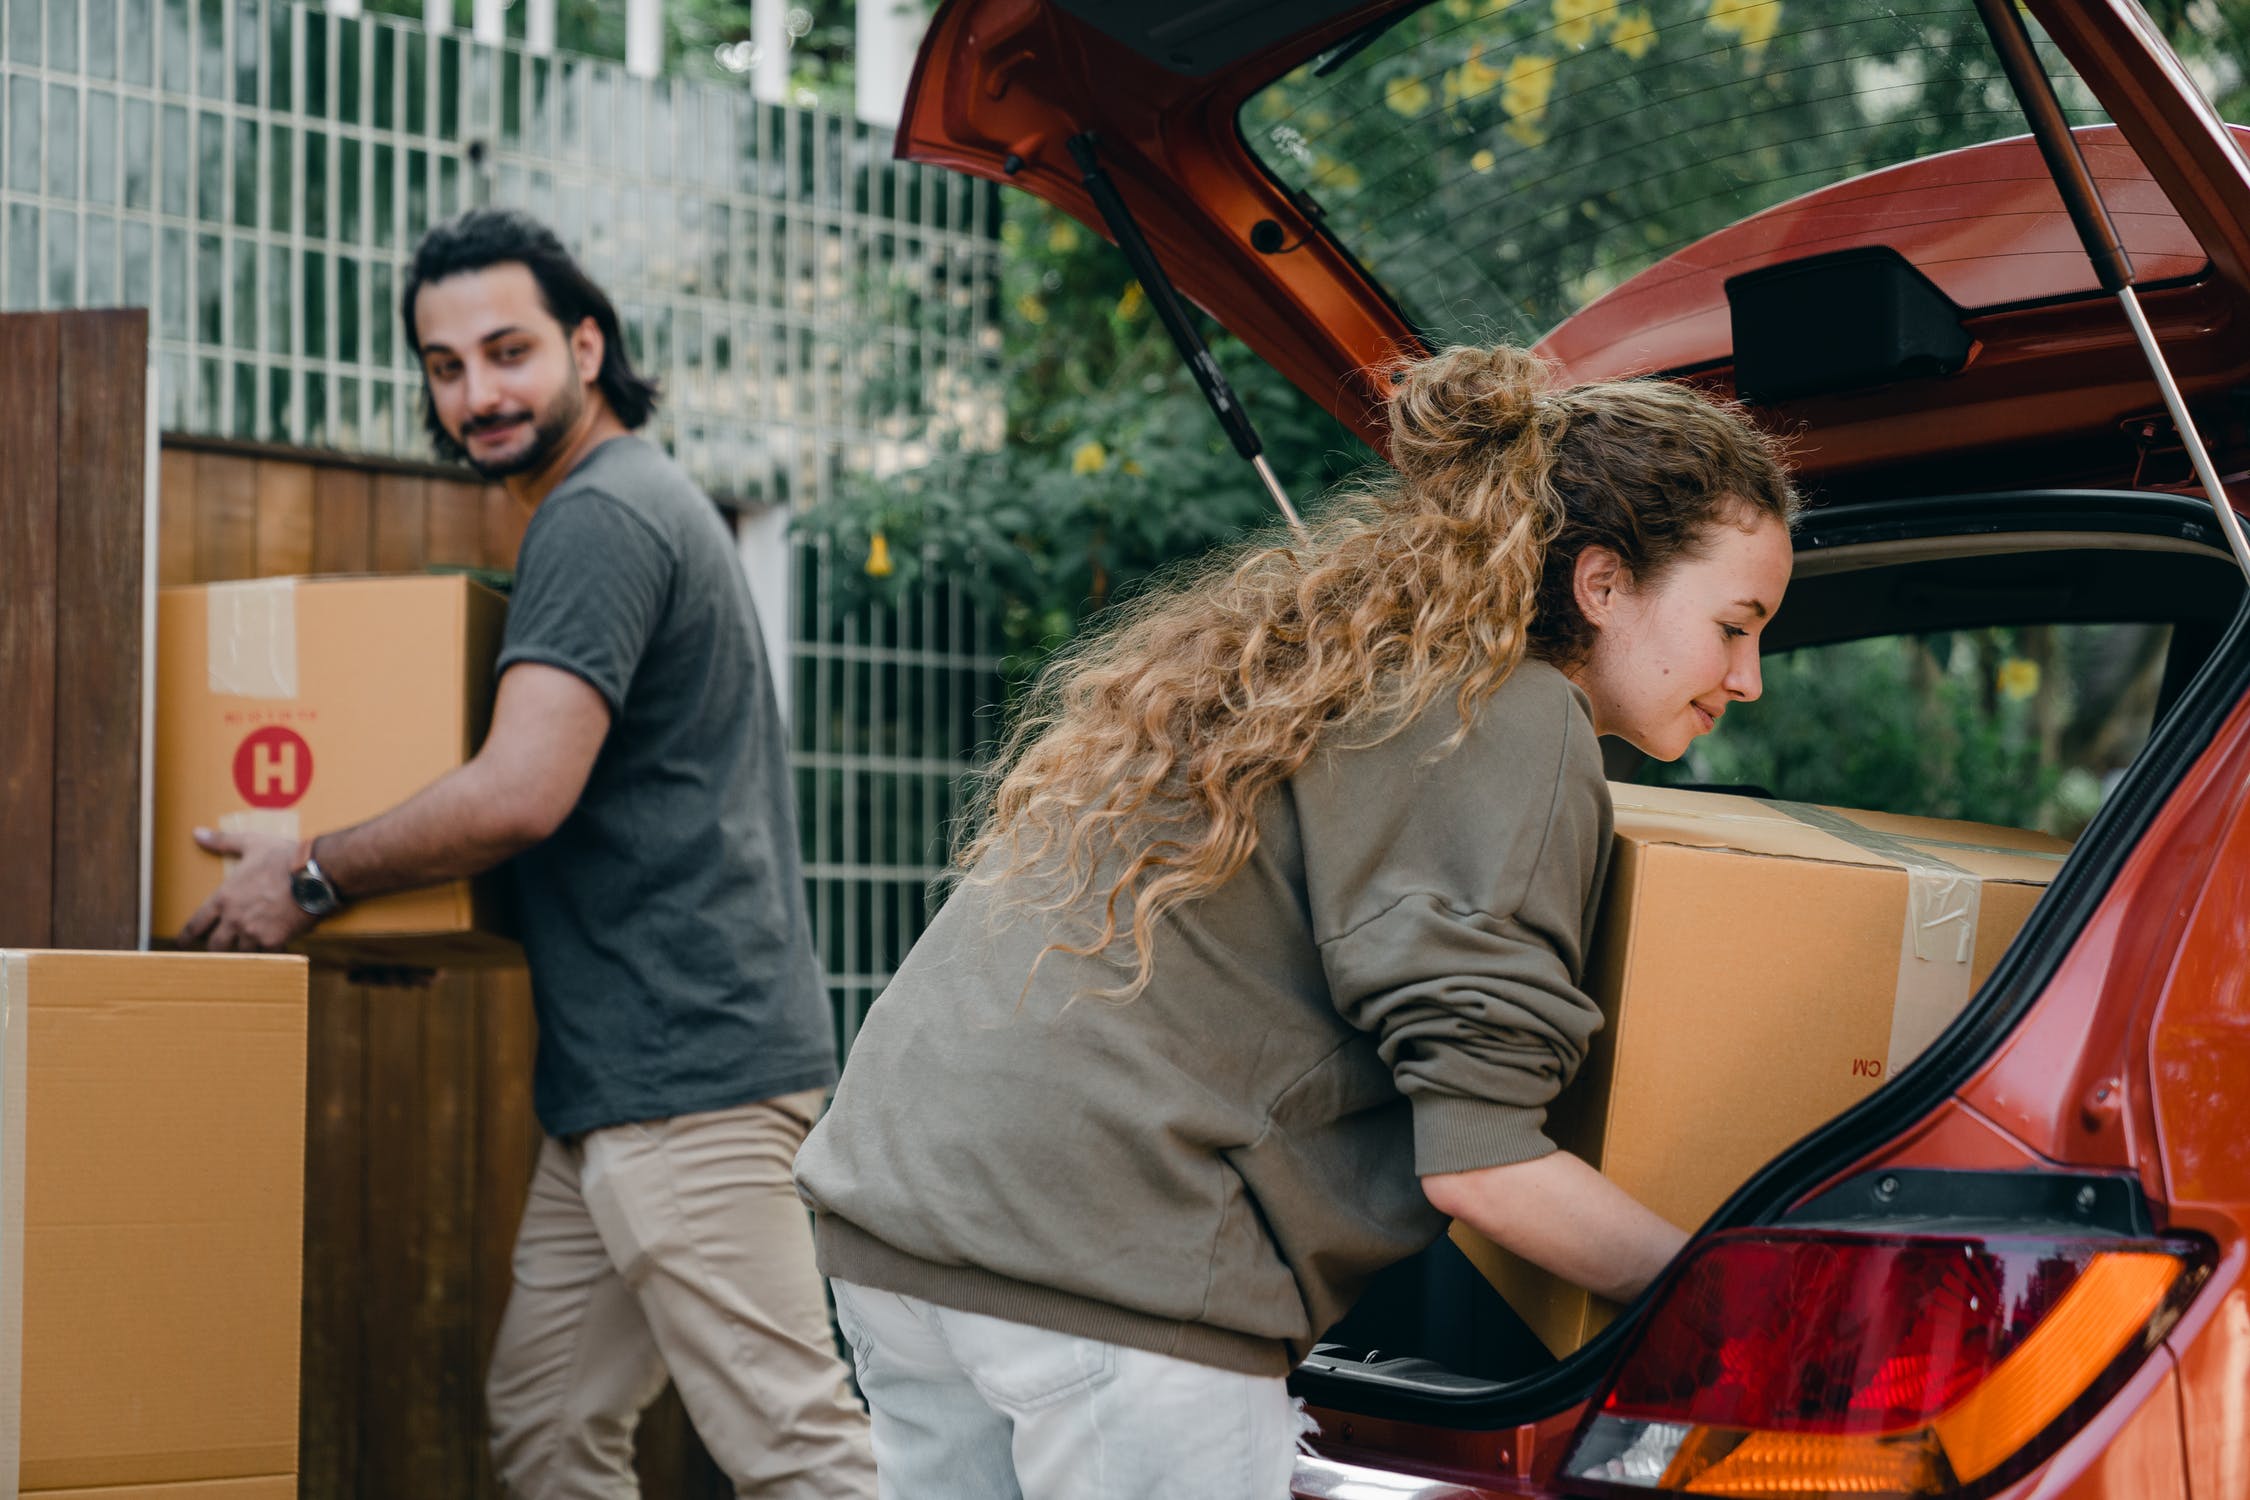 person helping load car with boxes